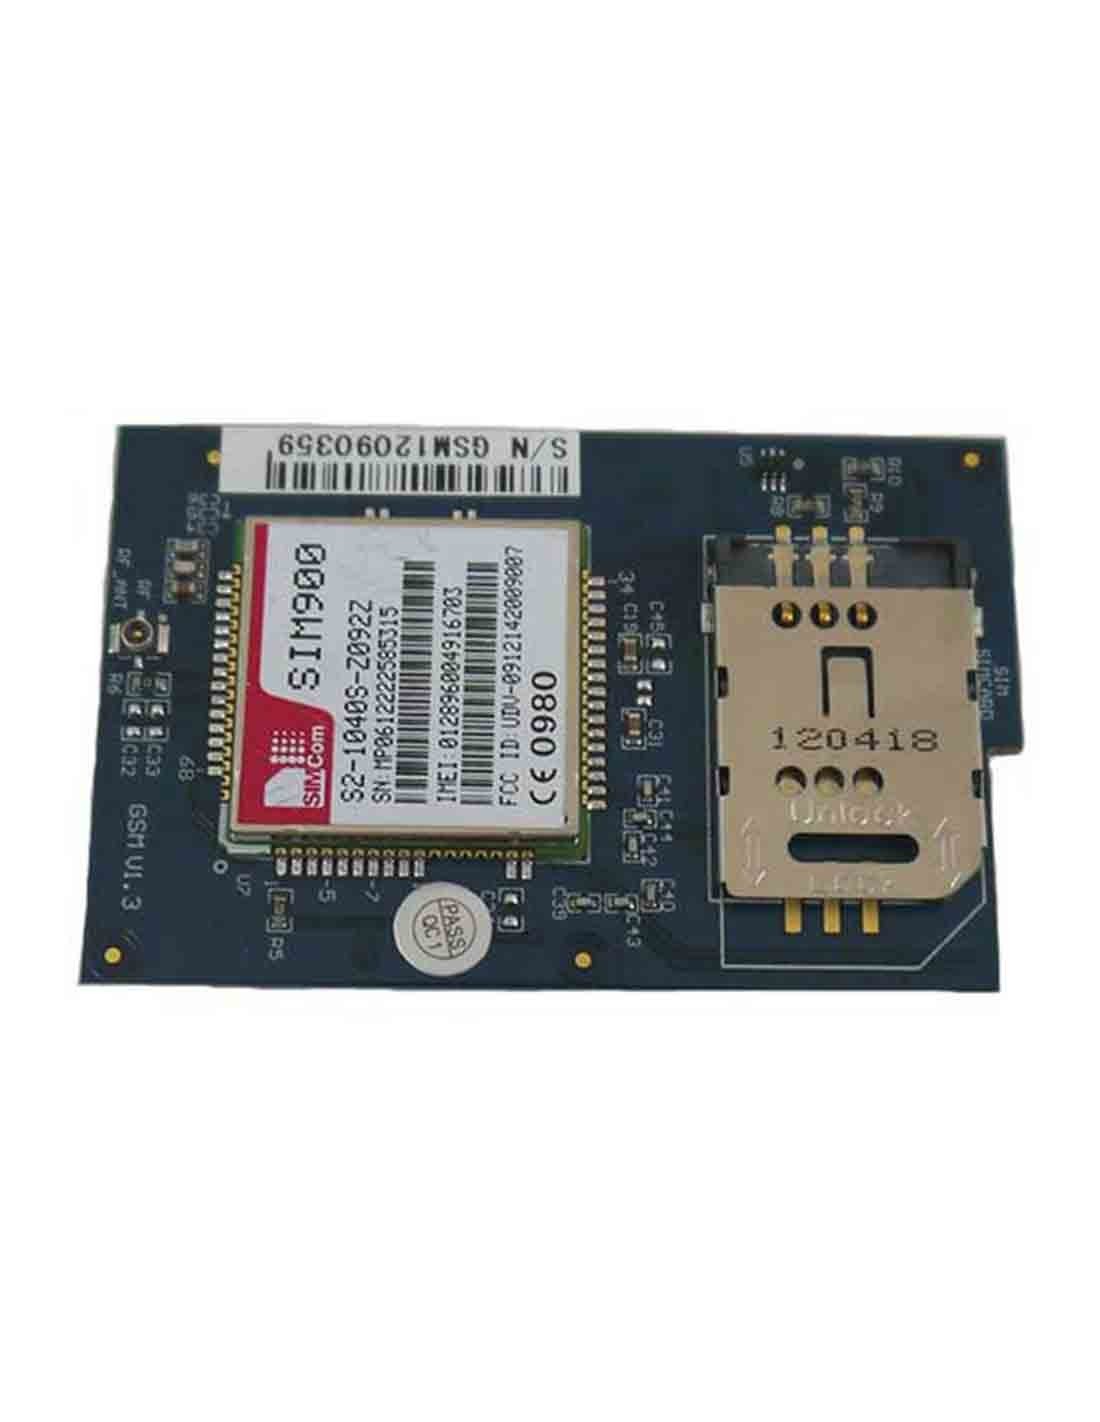 Yeastar GSM Module (1 GSM Port) YST-GSM is compatible with MyPBX /NeoGate